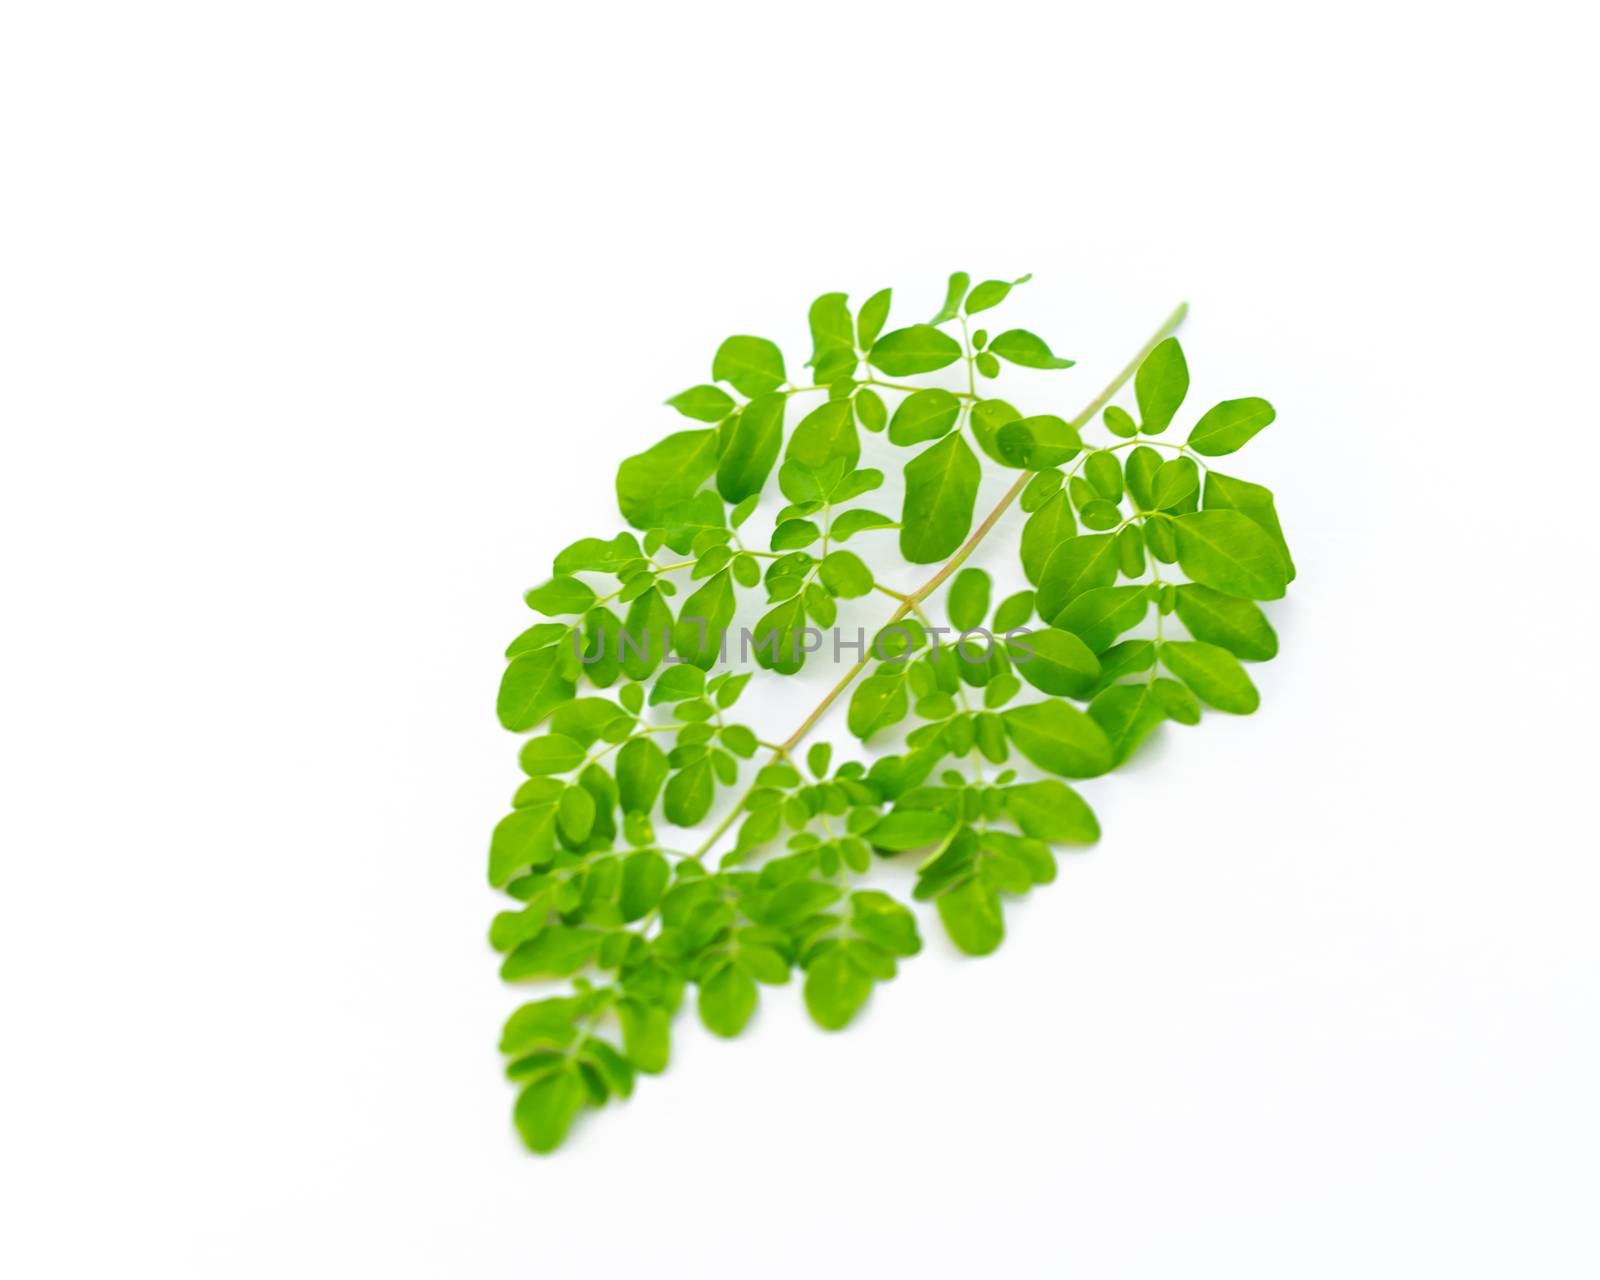 Homegrown Moringa oleifera leaves isolated on white background. Native to tropical, subtropical regions of Asia. Common names include drumstick, Malunggay, horseradish or benzolive tree